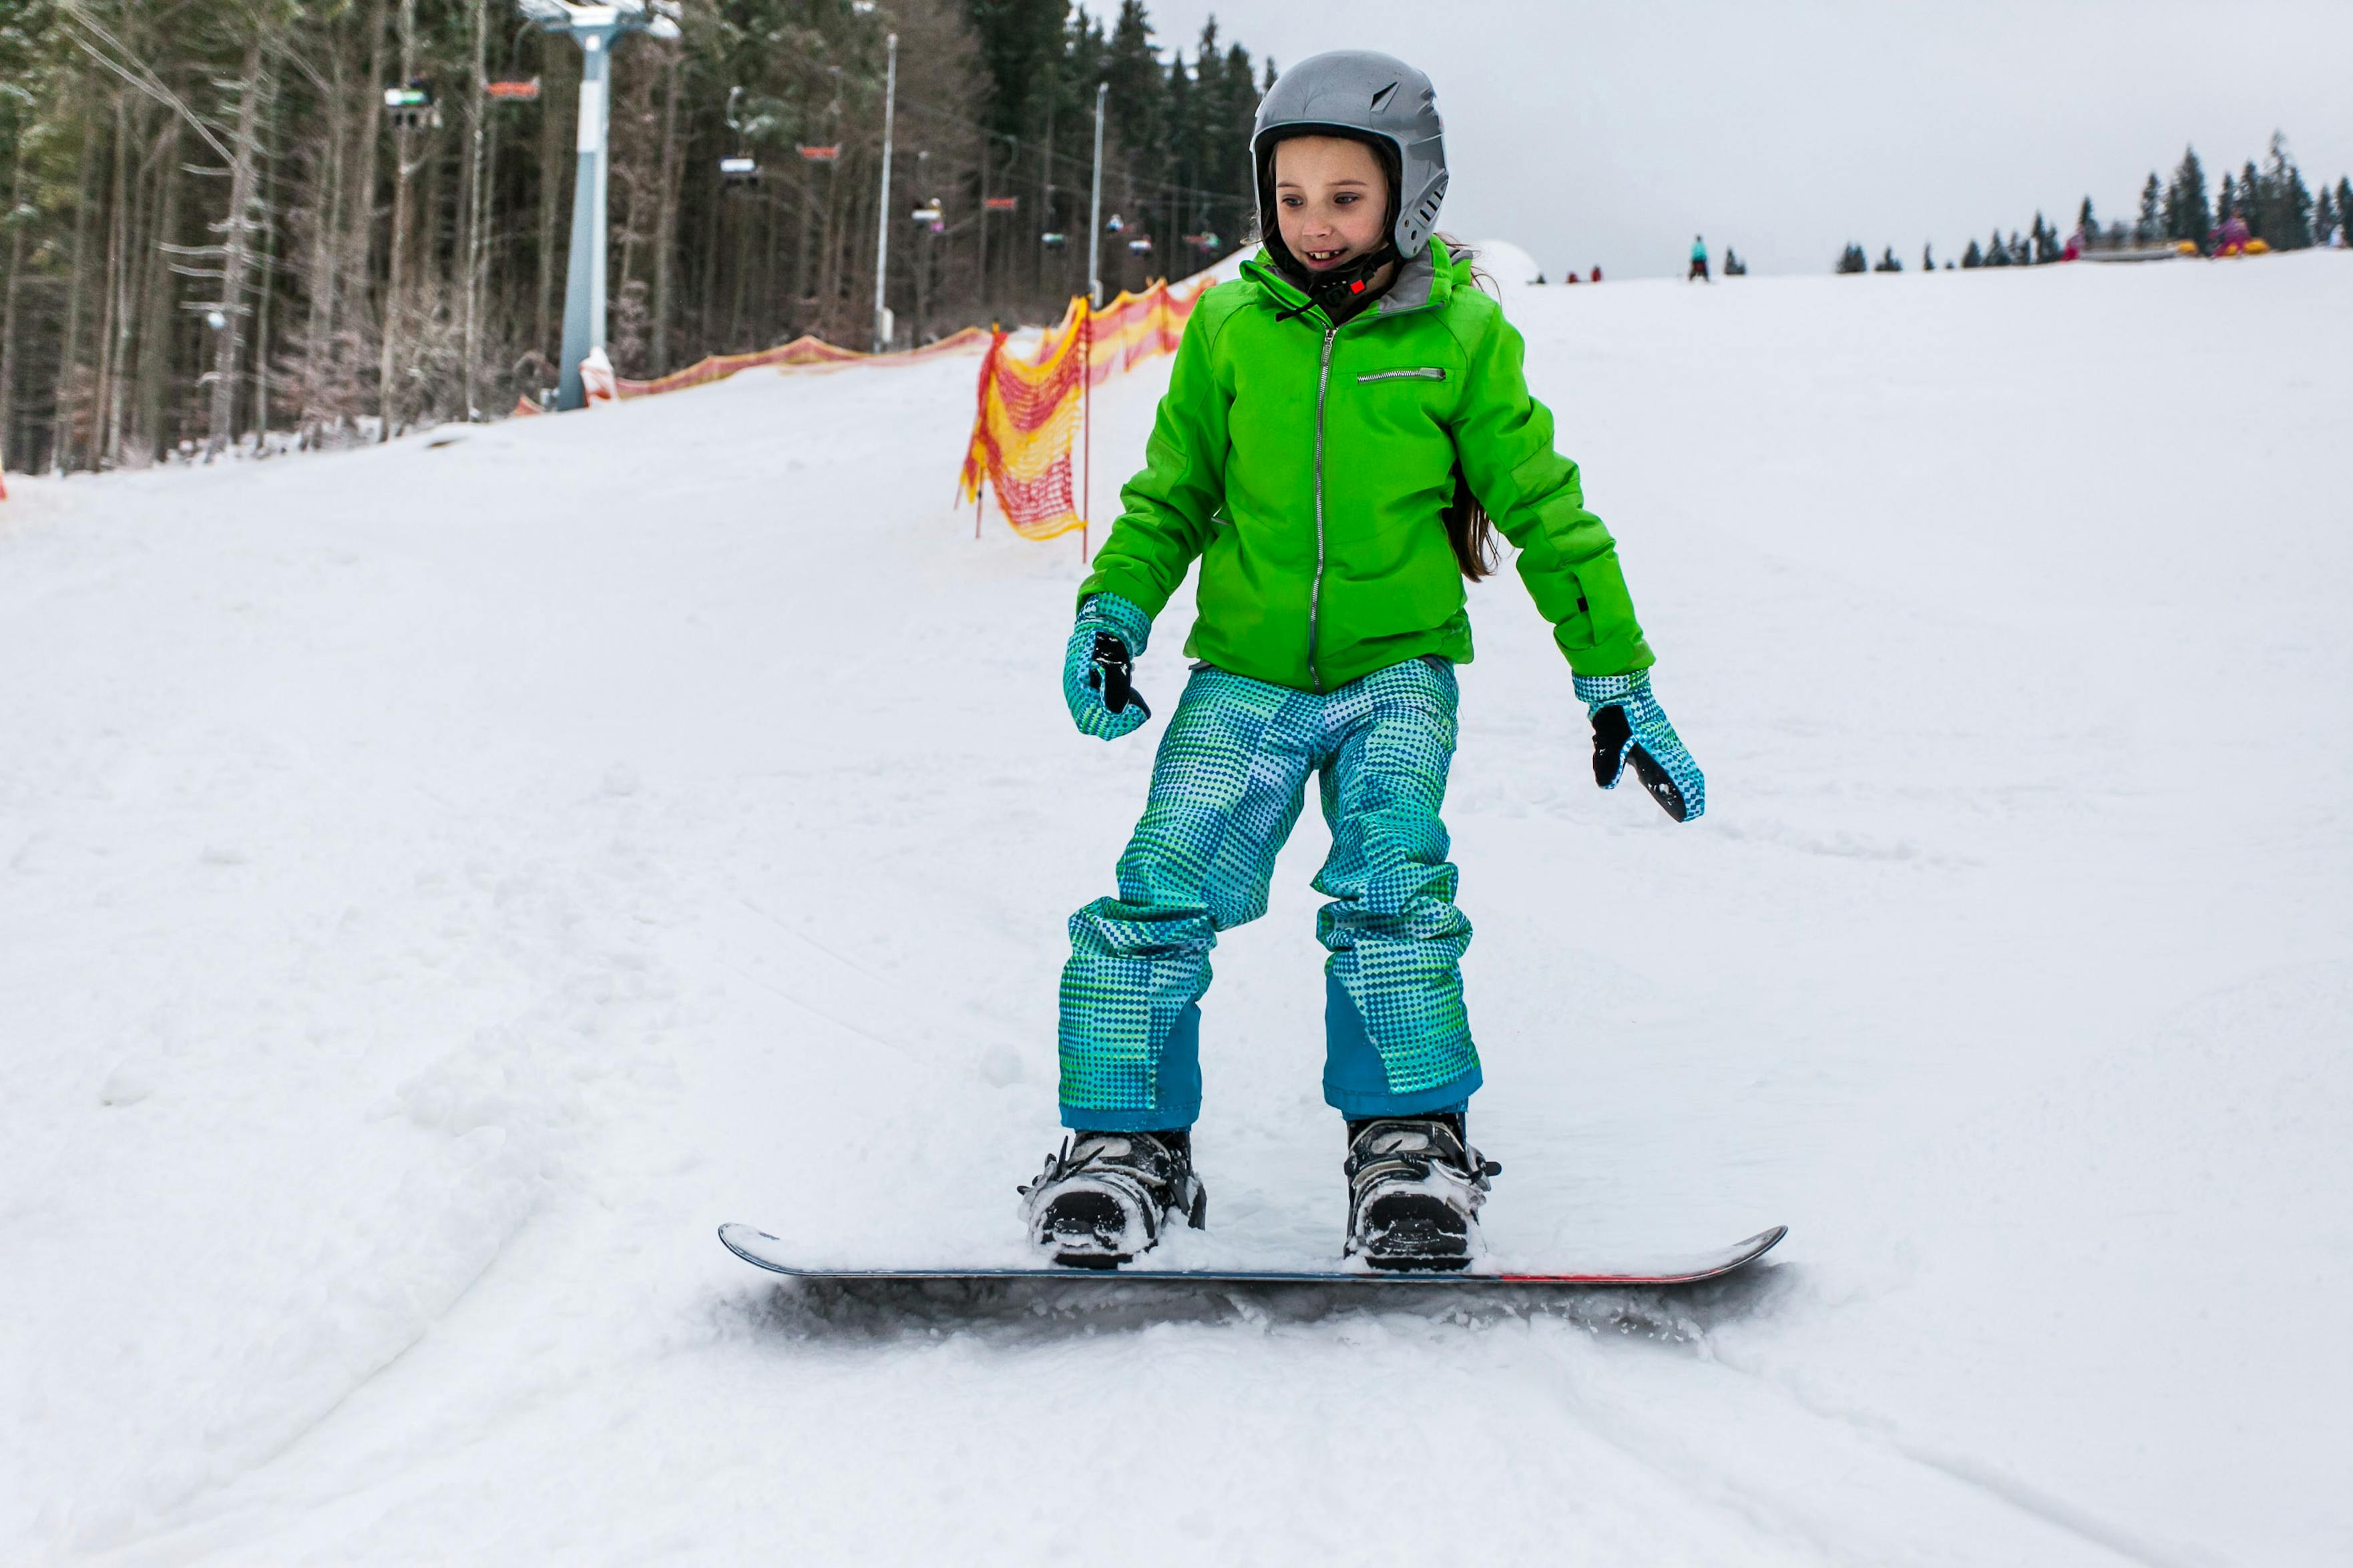 How to Teach Kids to Snowboard